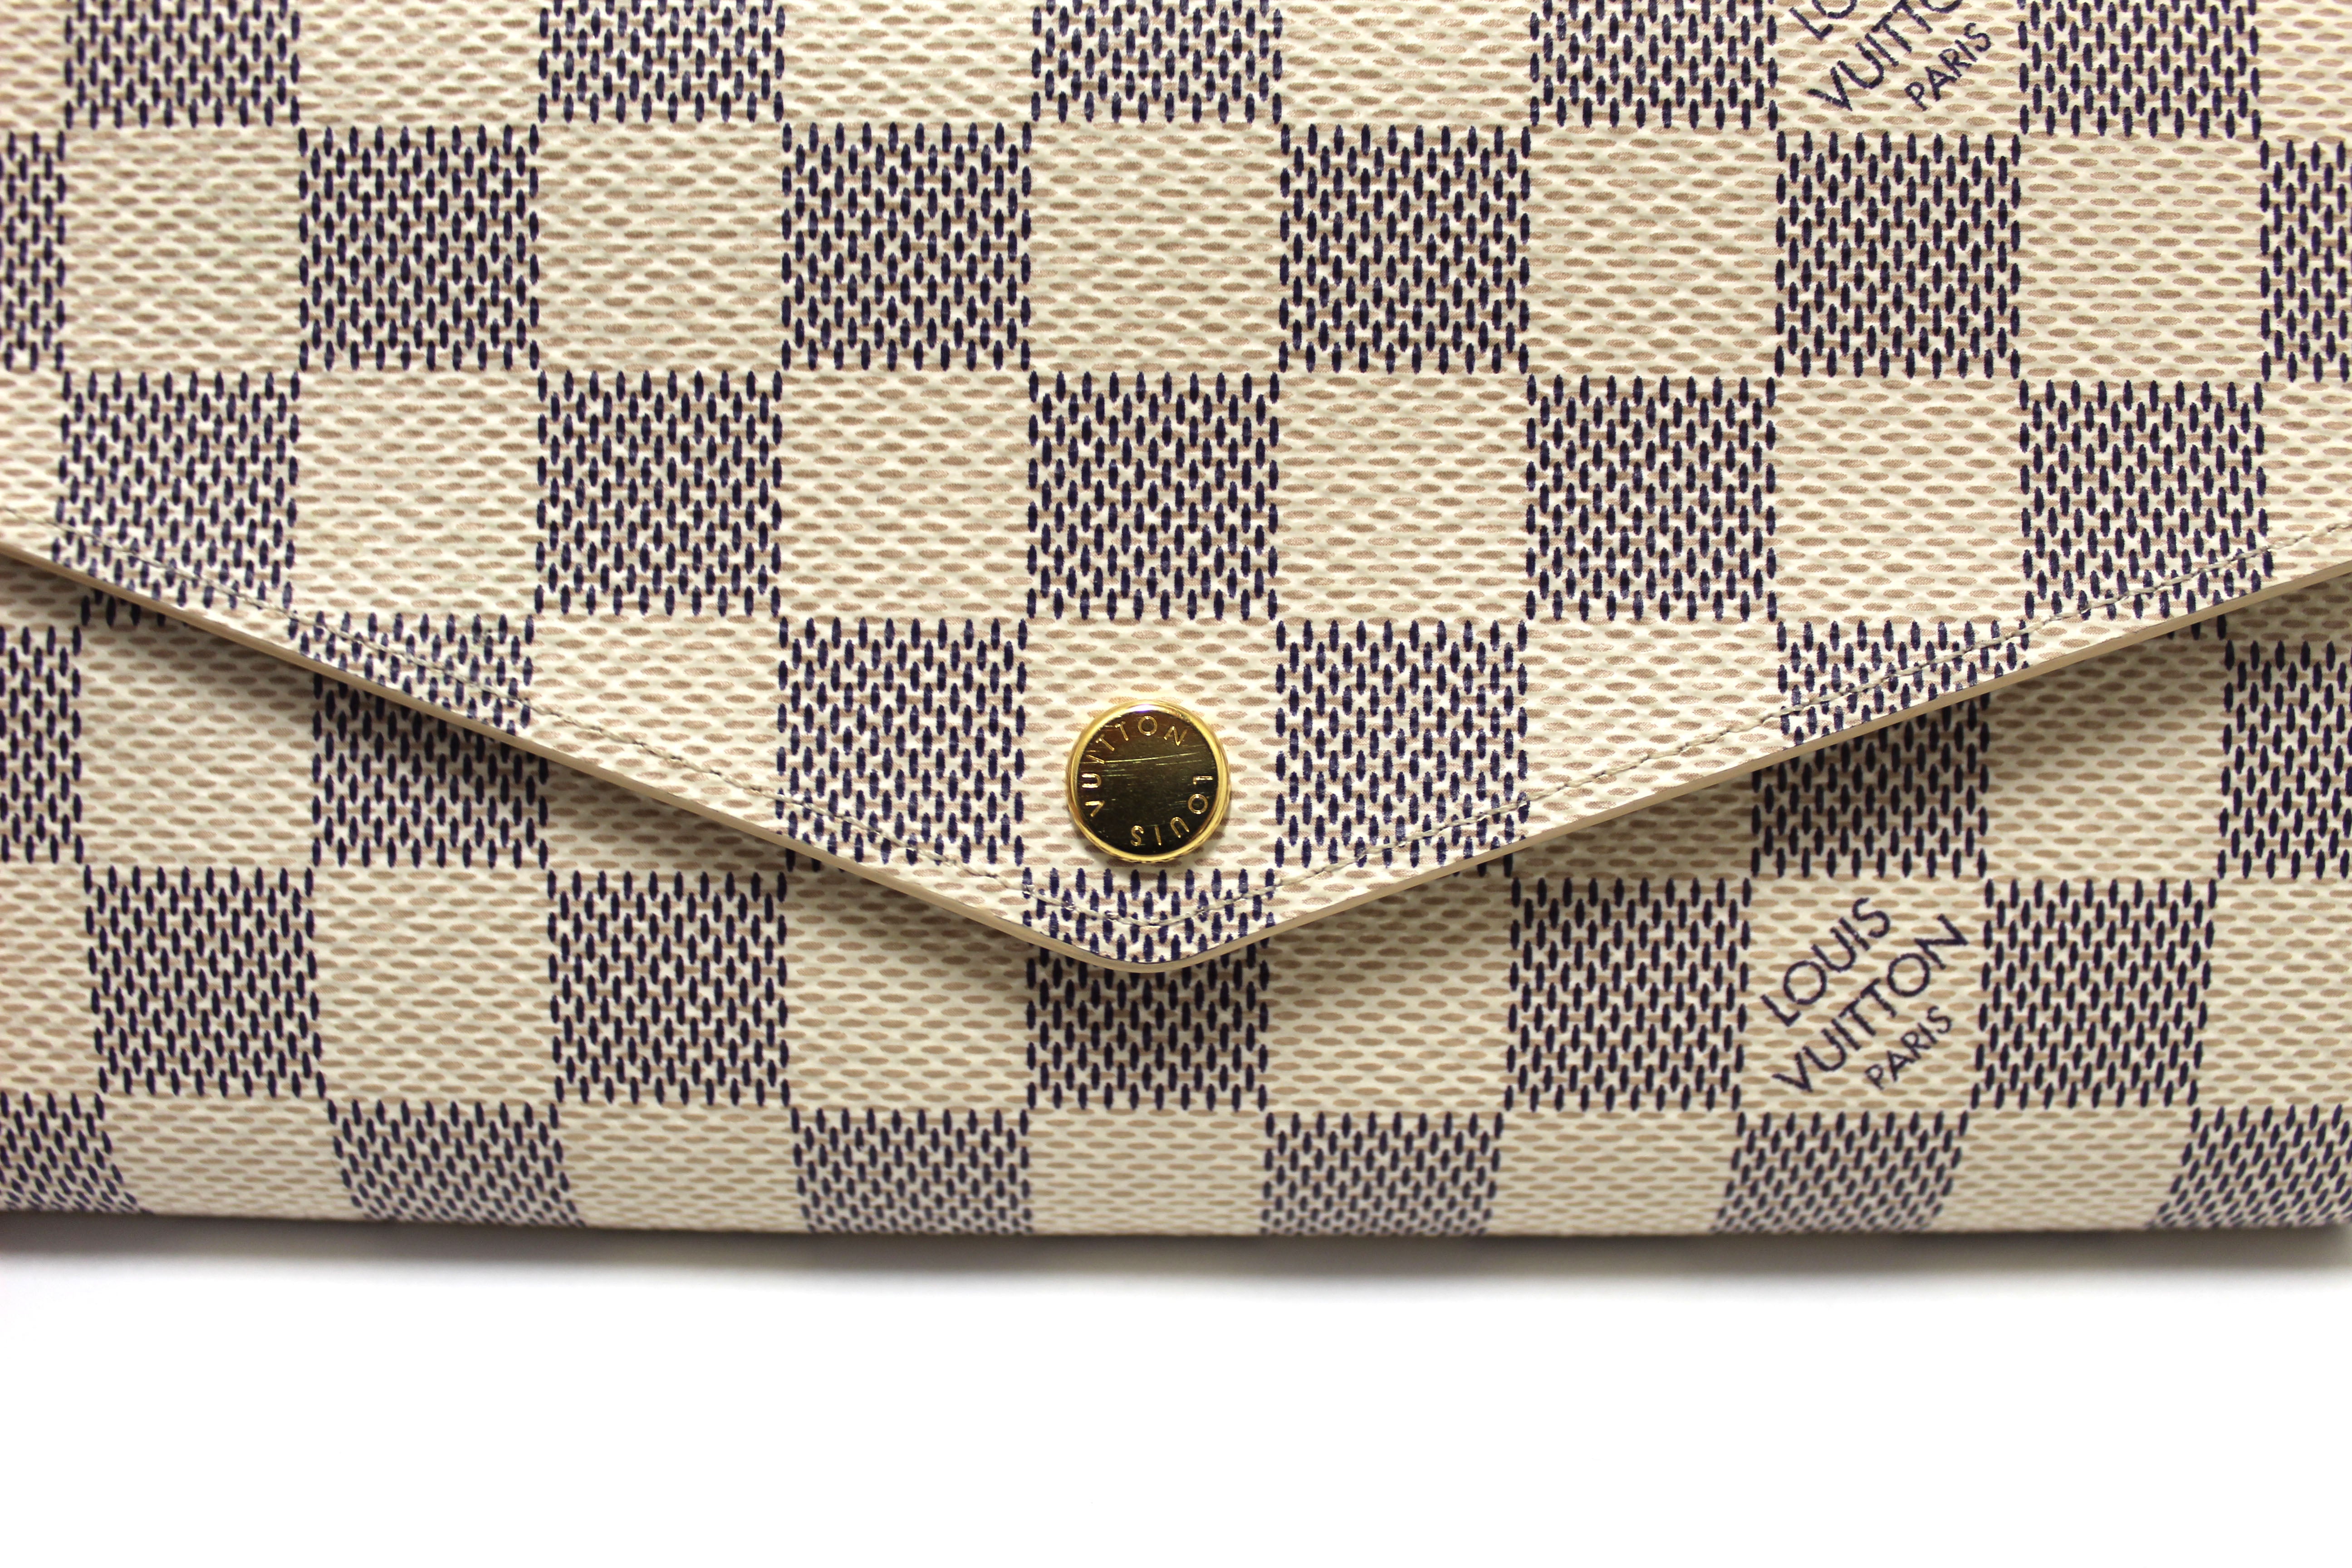 Sarah Wallet Damier Azur Canvas - Wallets and Small Leather Goods